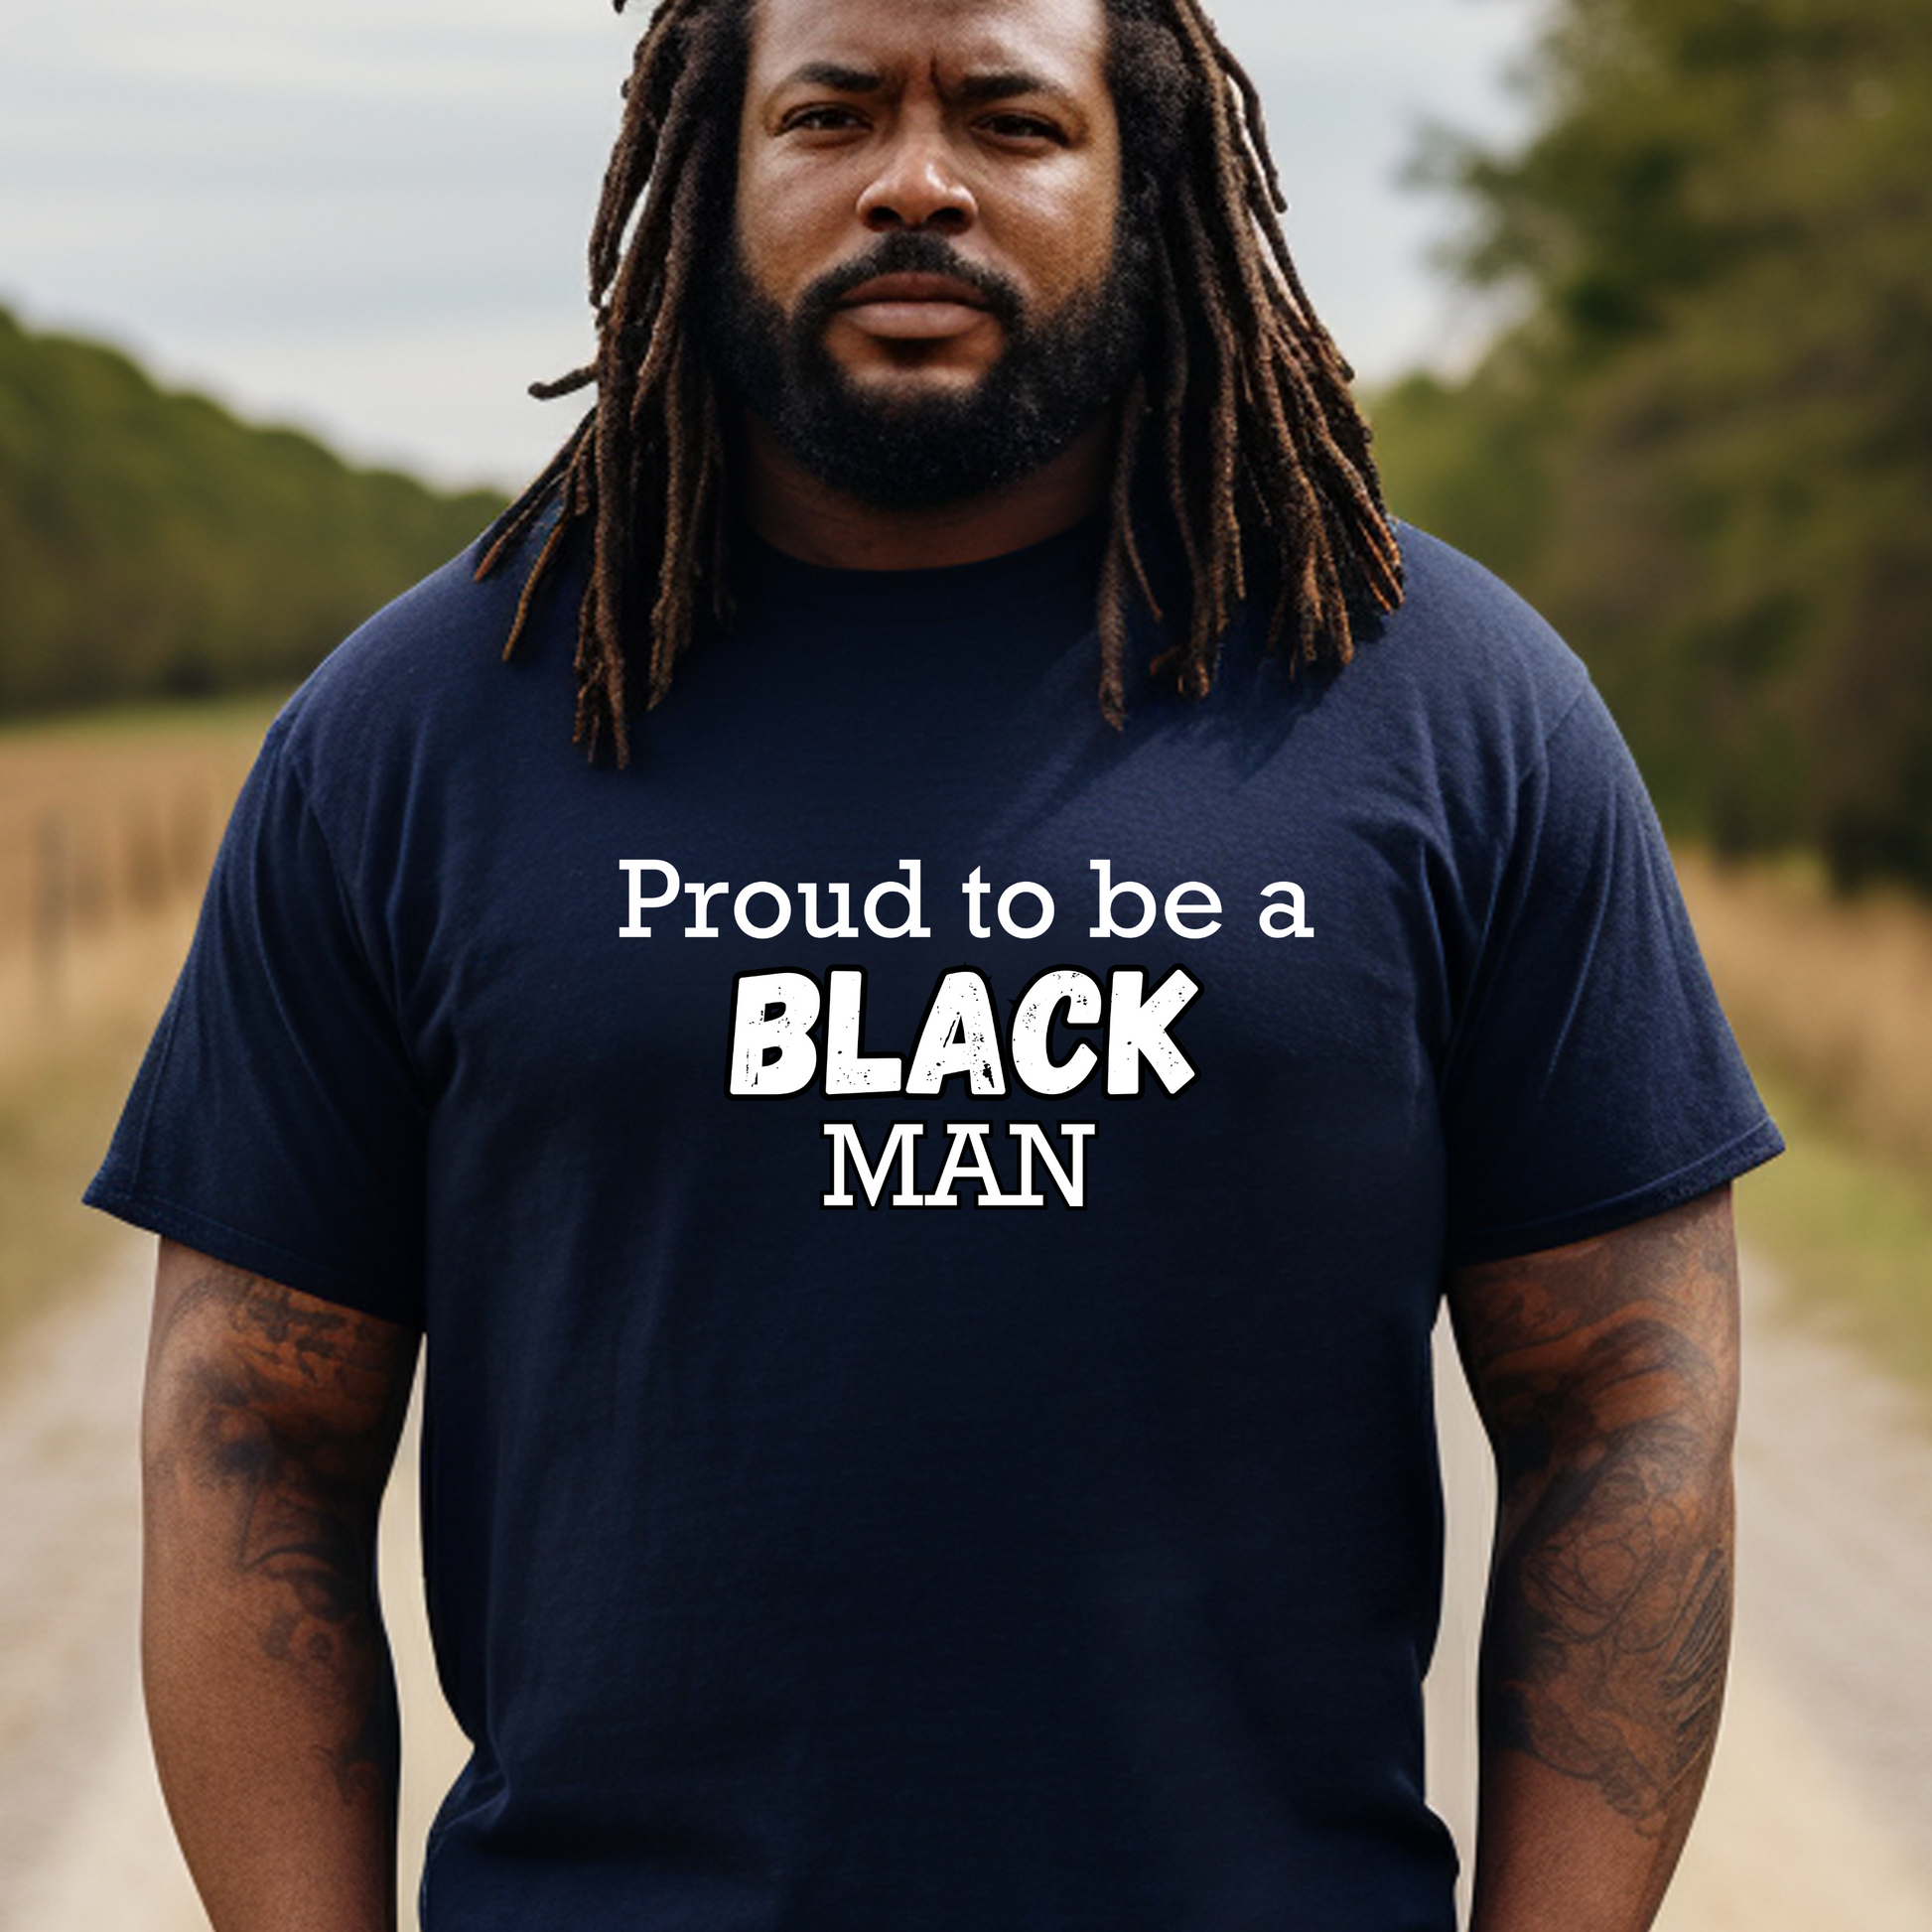 Introducing Triumph Tees' empowering navy t-shirt, boldly proclaiming, "Proud to be a black man, even more proud to be a Christian man." Shop now and let your faith shine through with this powerful design.